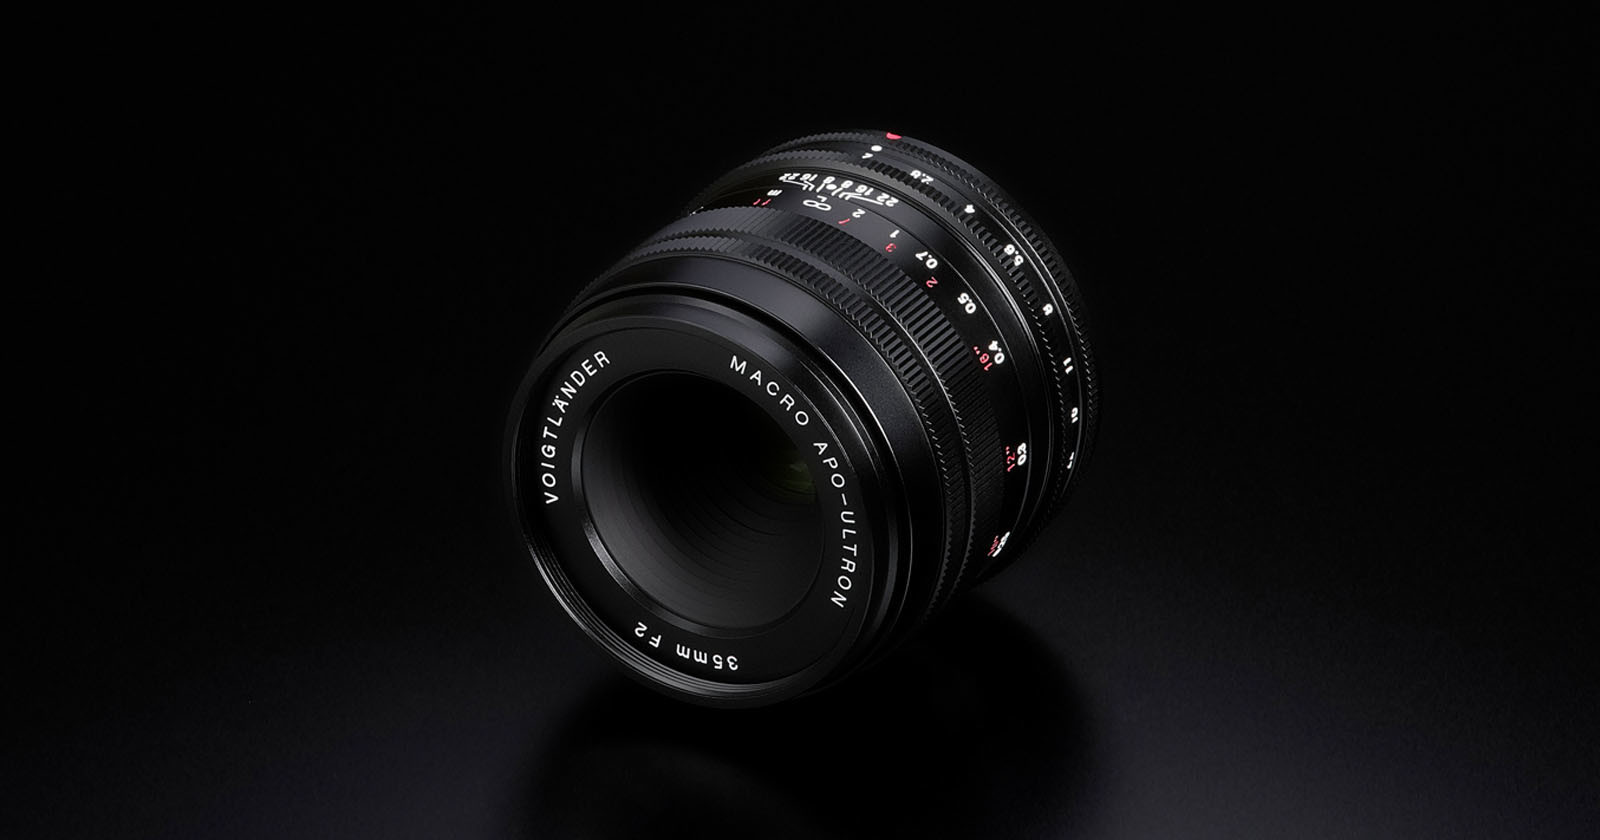 The Voigtlander Macro 35mm f/2 is Made Exclusively for Fuji X-Mount